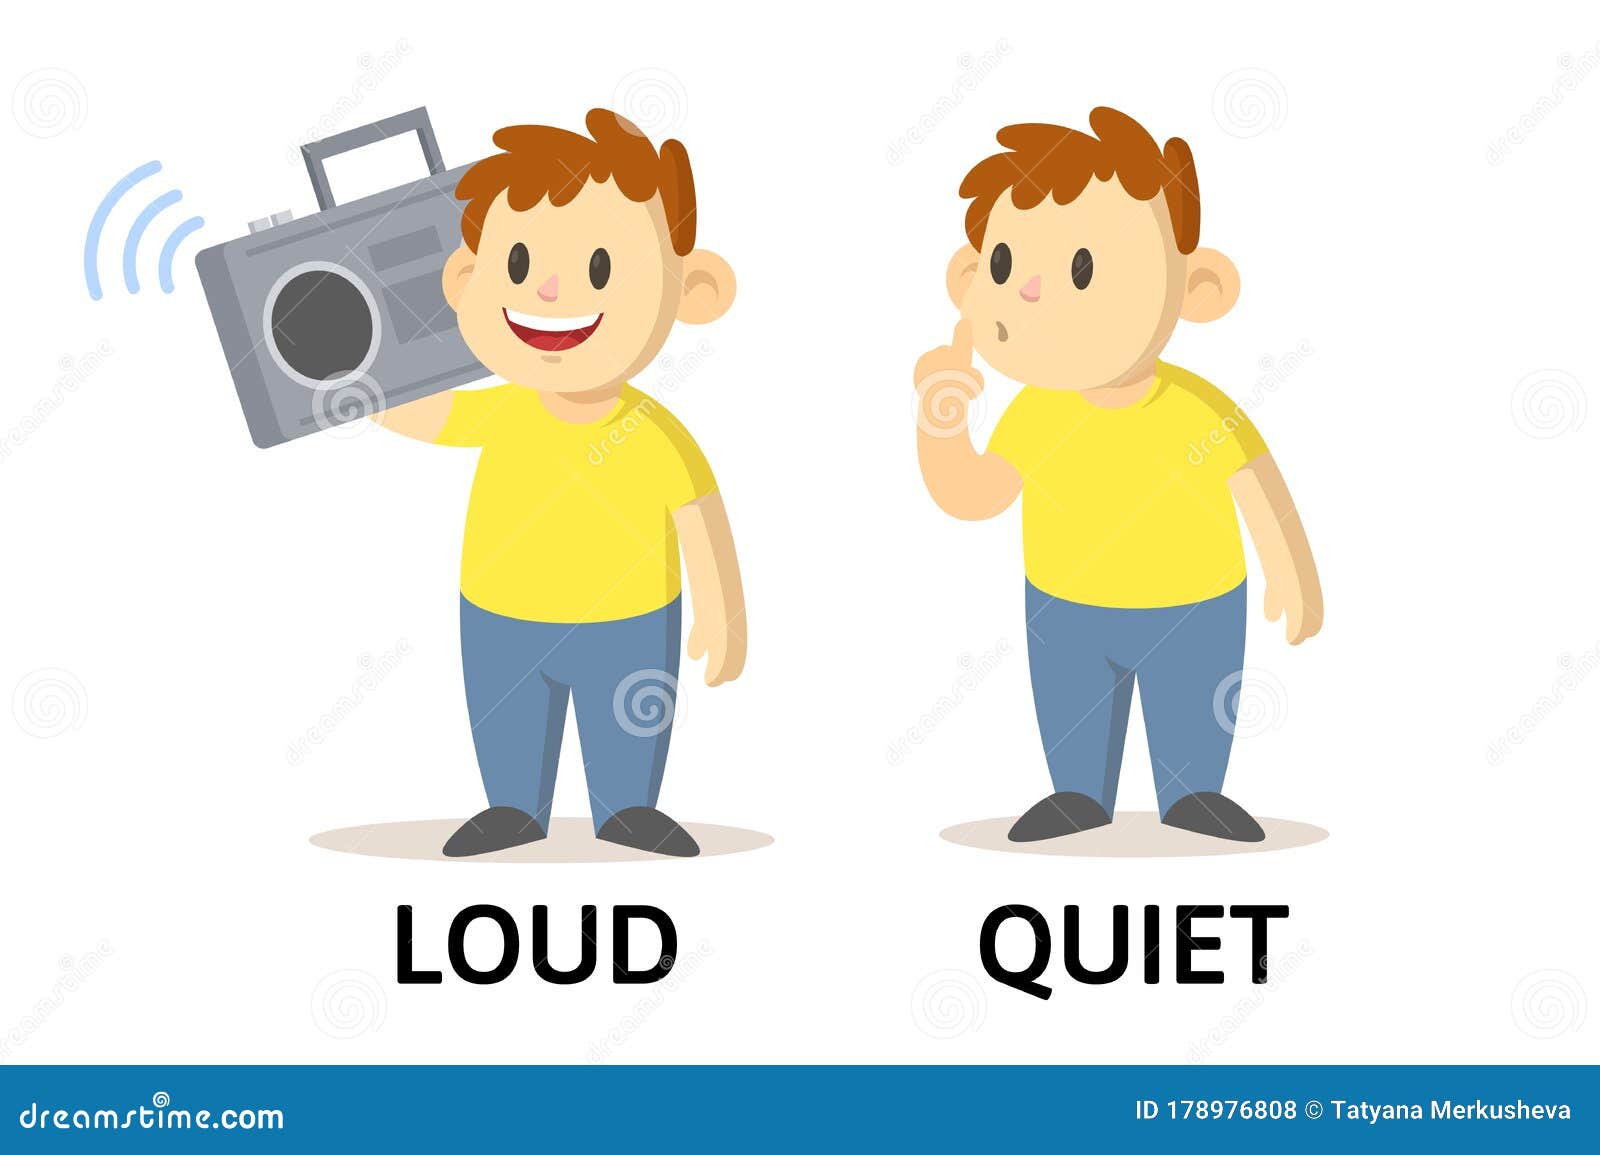 words quiet and loud flashcard with cartoon characters. opposite adjectives explanation card. flat  